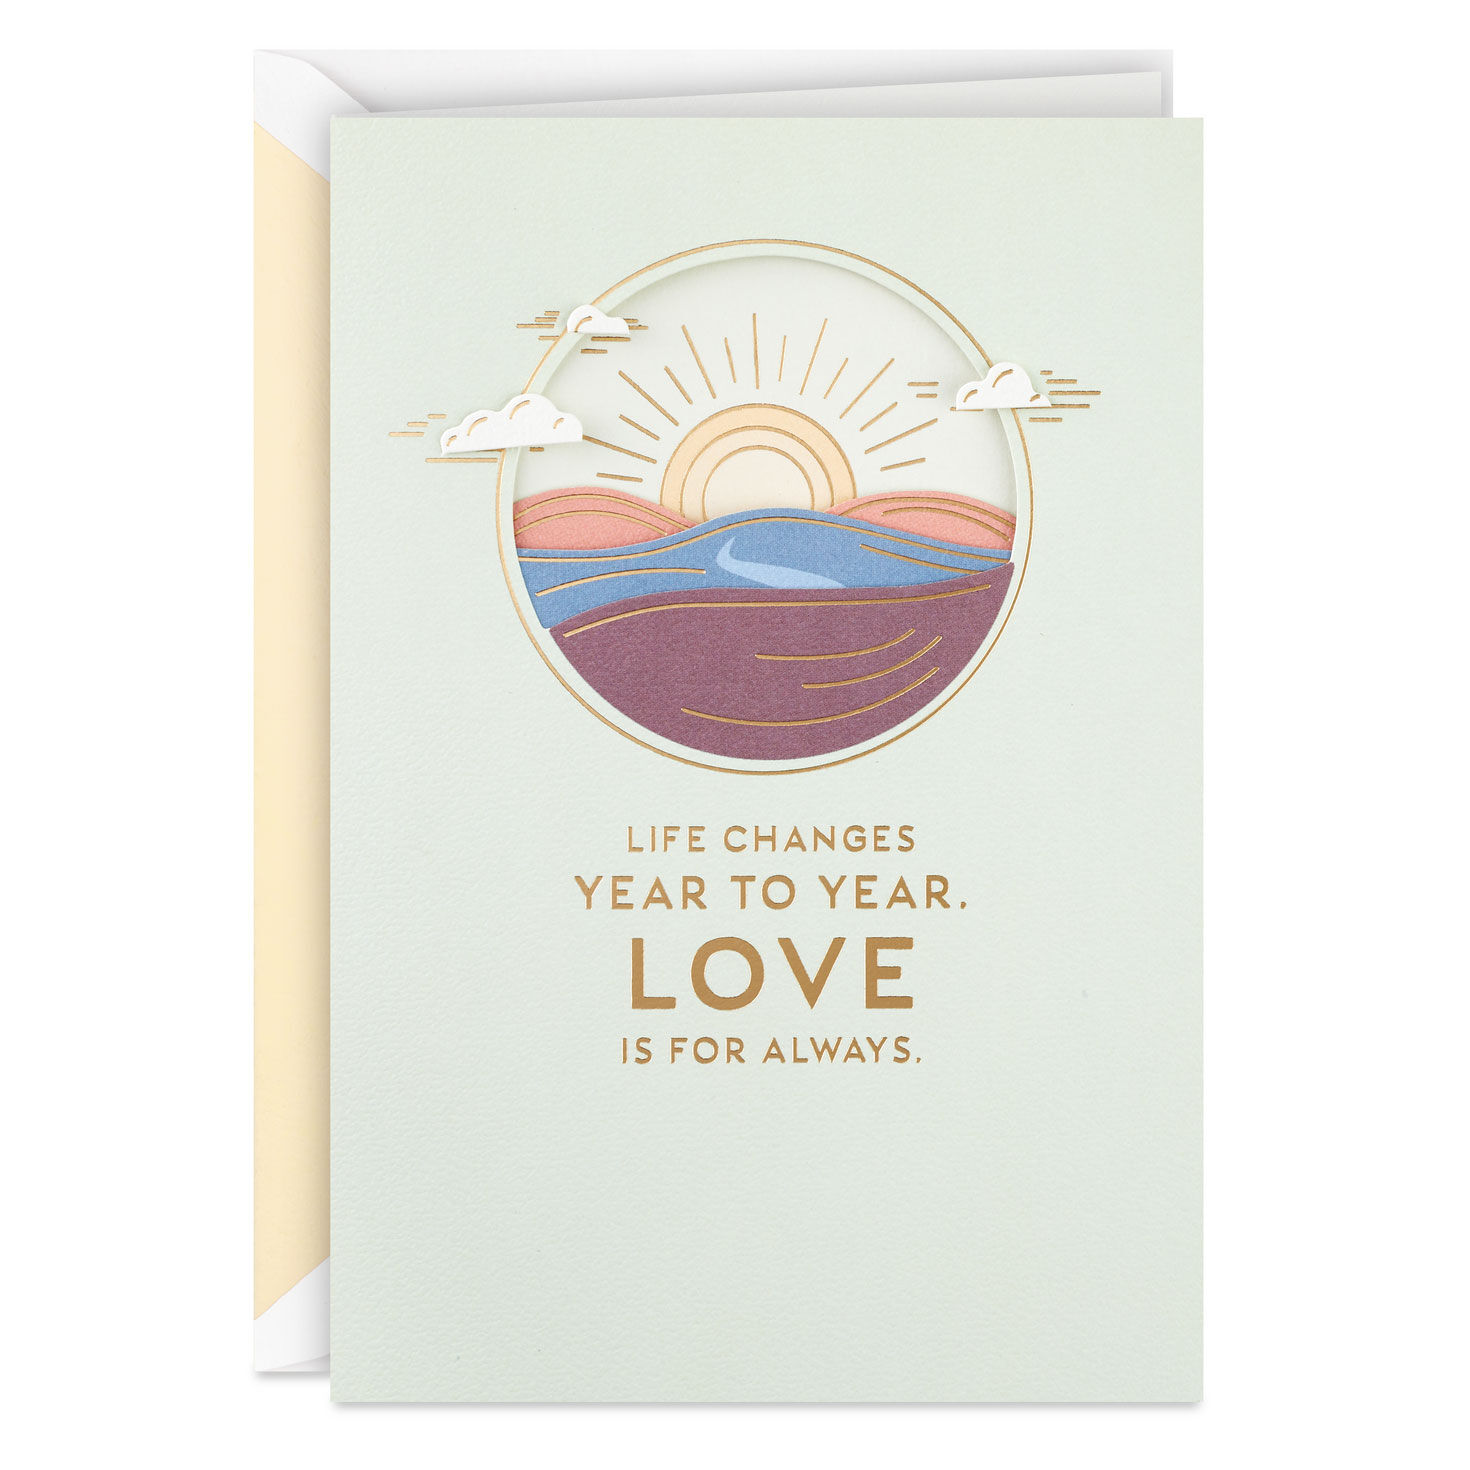 Love of My Life Anniversary Card for only USD 7.59 | Hallmark